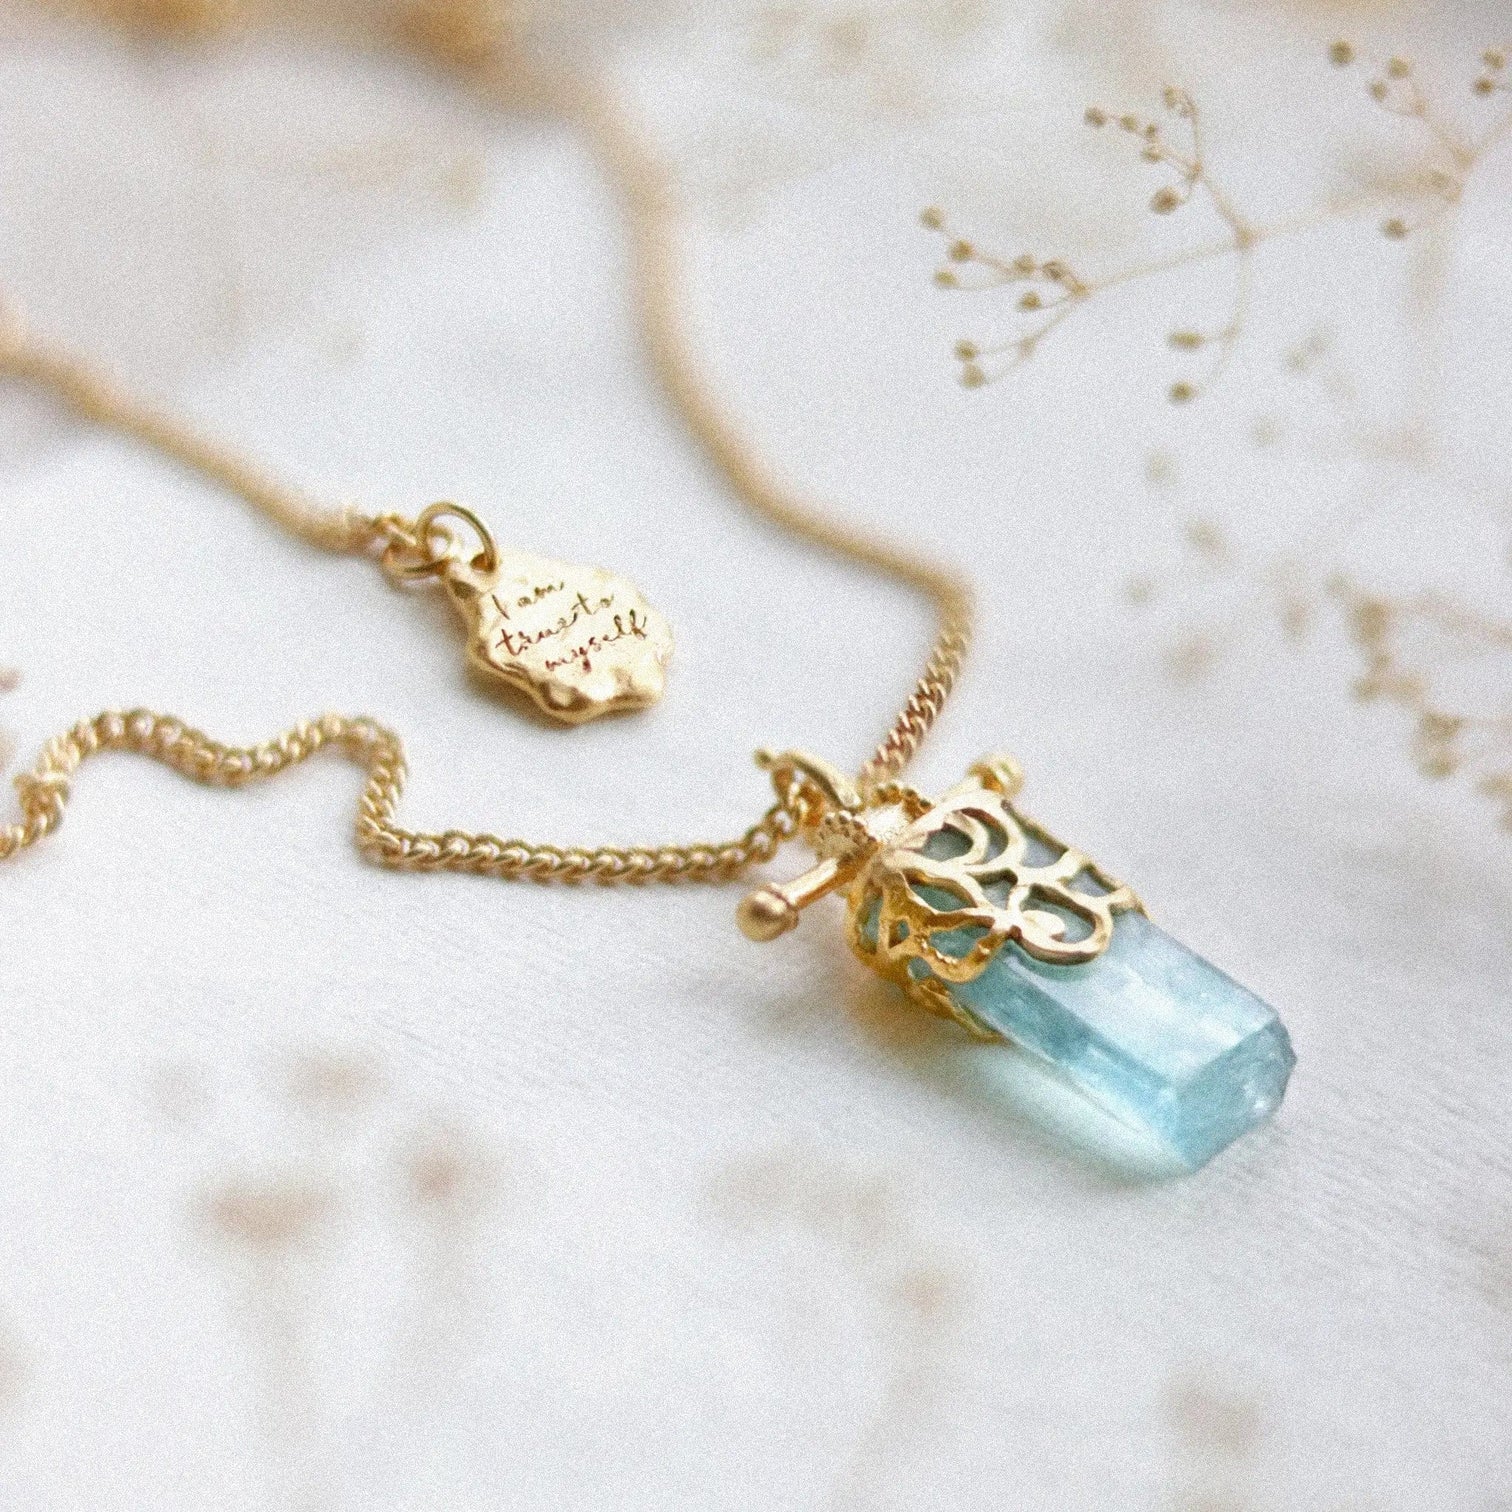 Meet Ananda Soul, the Ethically Produced Jewelry Brand in Bali